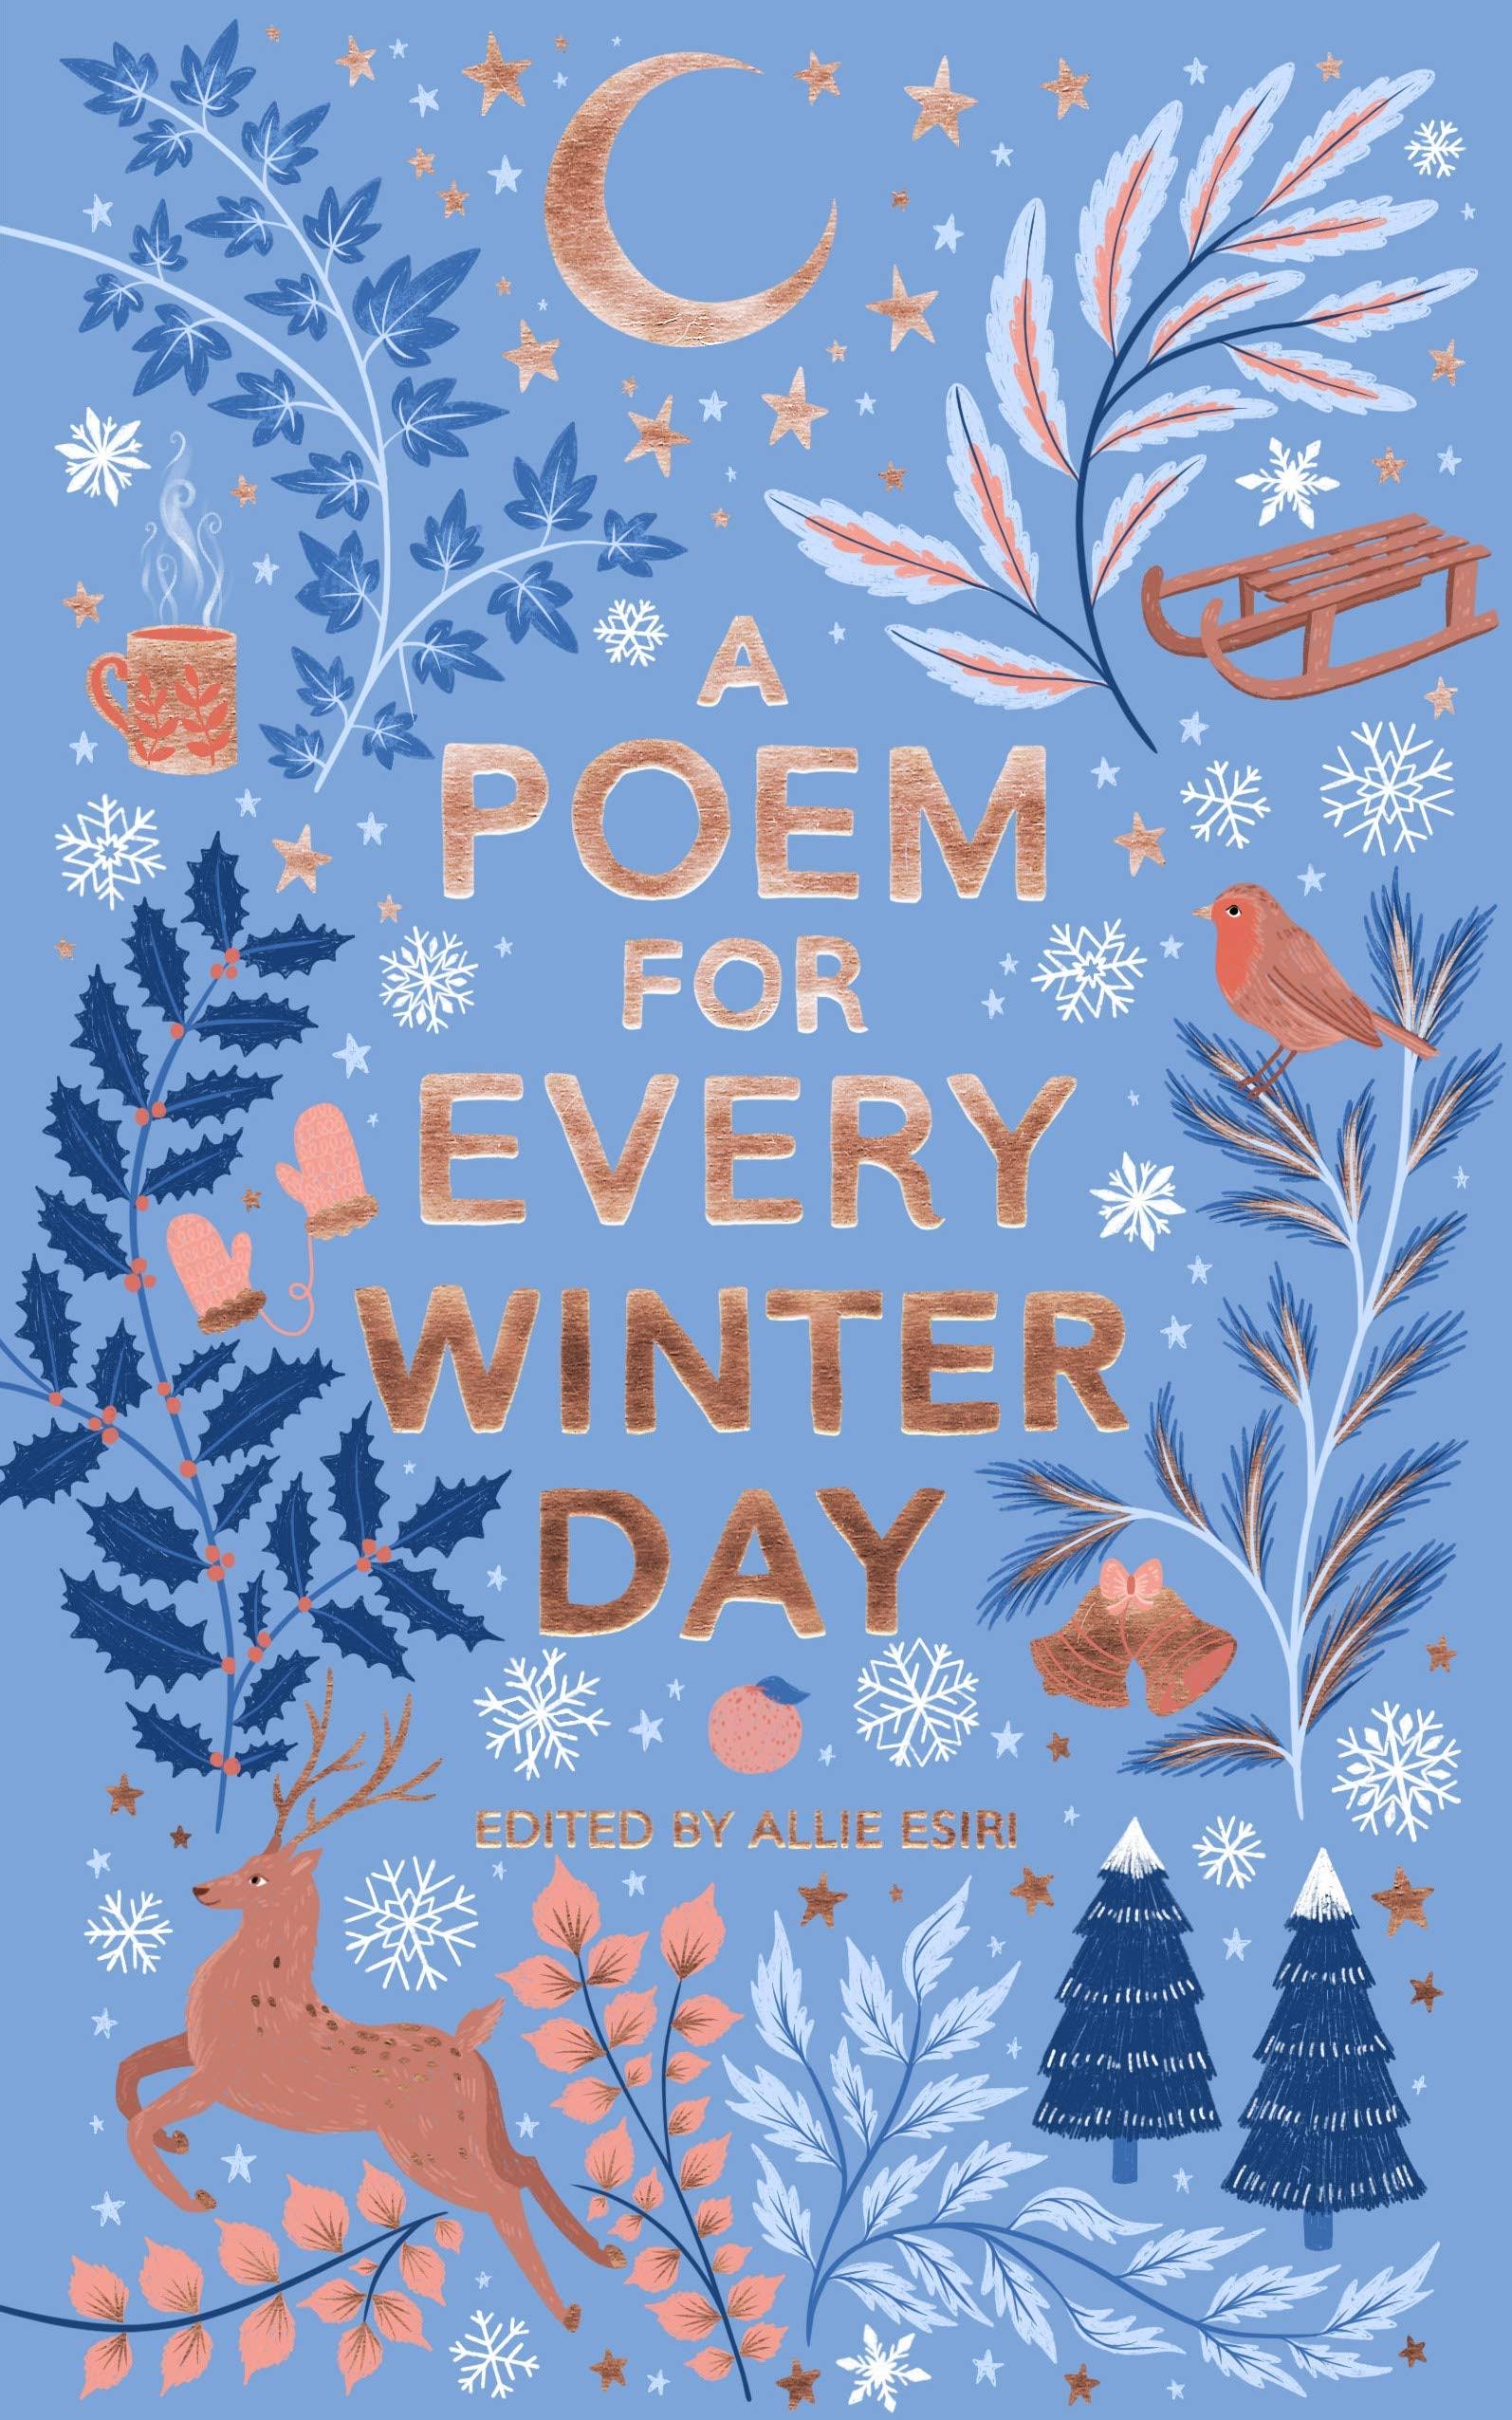 A Poem for Every Winter Day by Allie Esiri